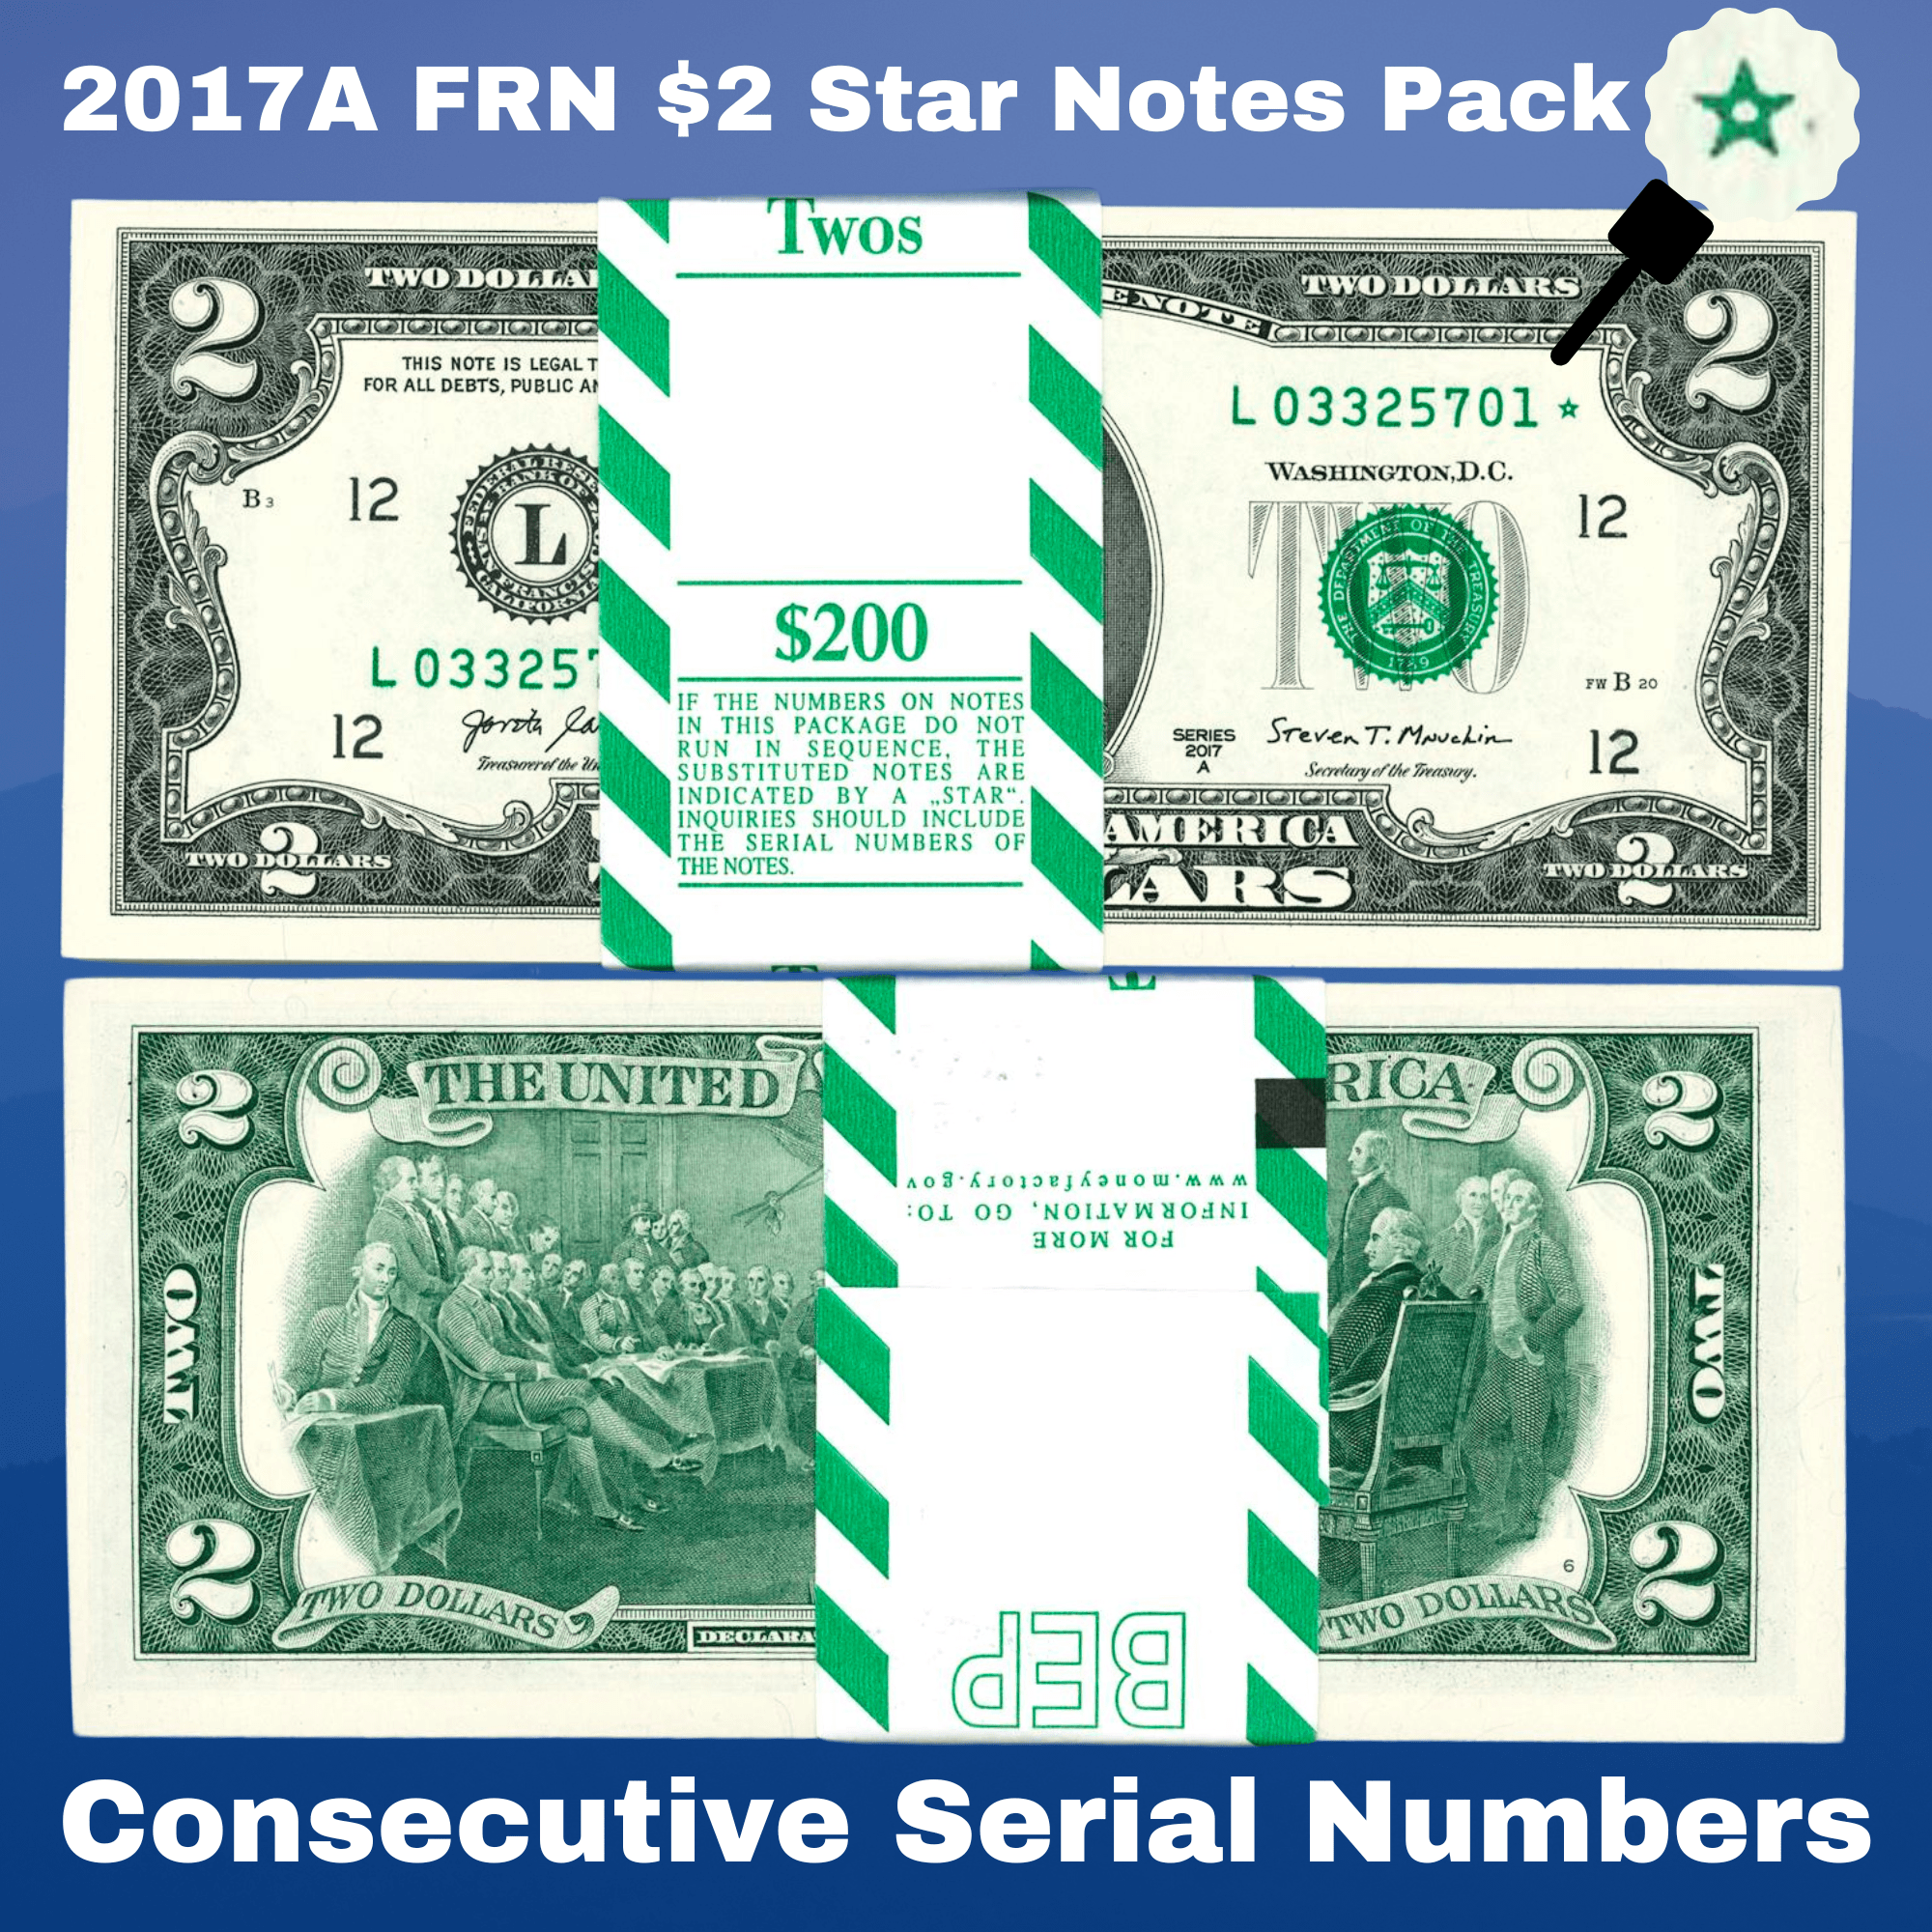 STAR Notes One Dollar Bills (Lot of 40) Fancy Serial Number $1 Bill Fed Res  Note